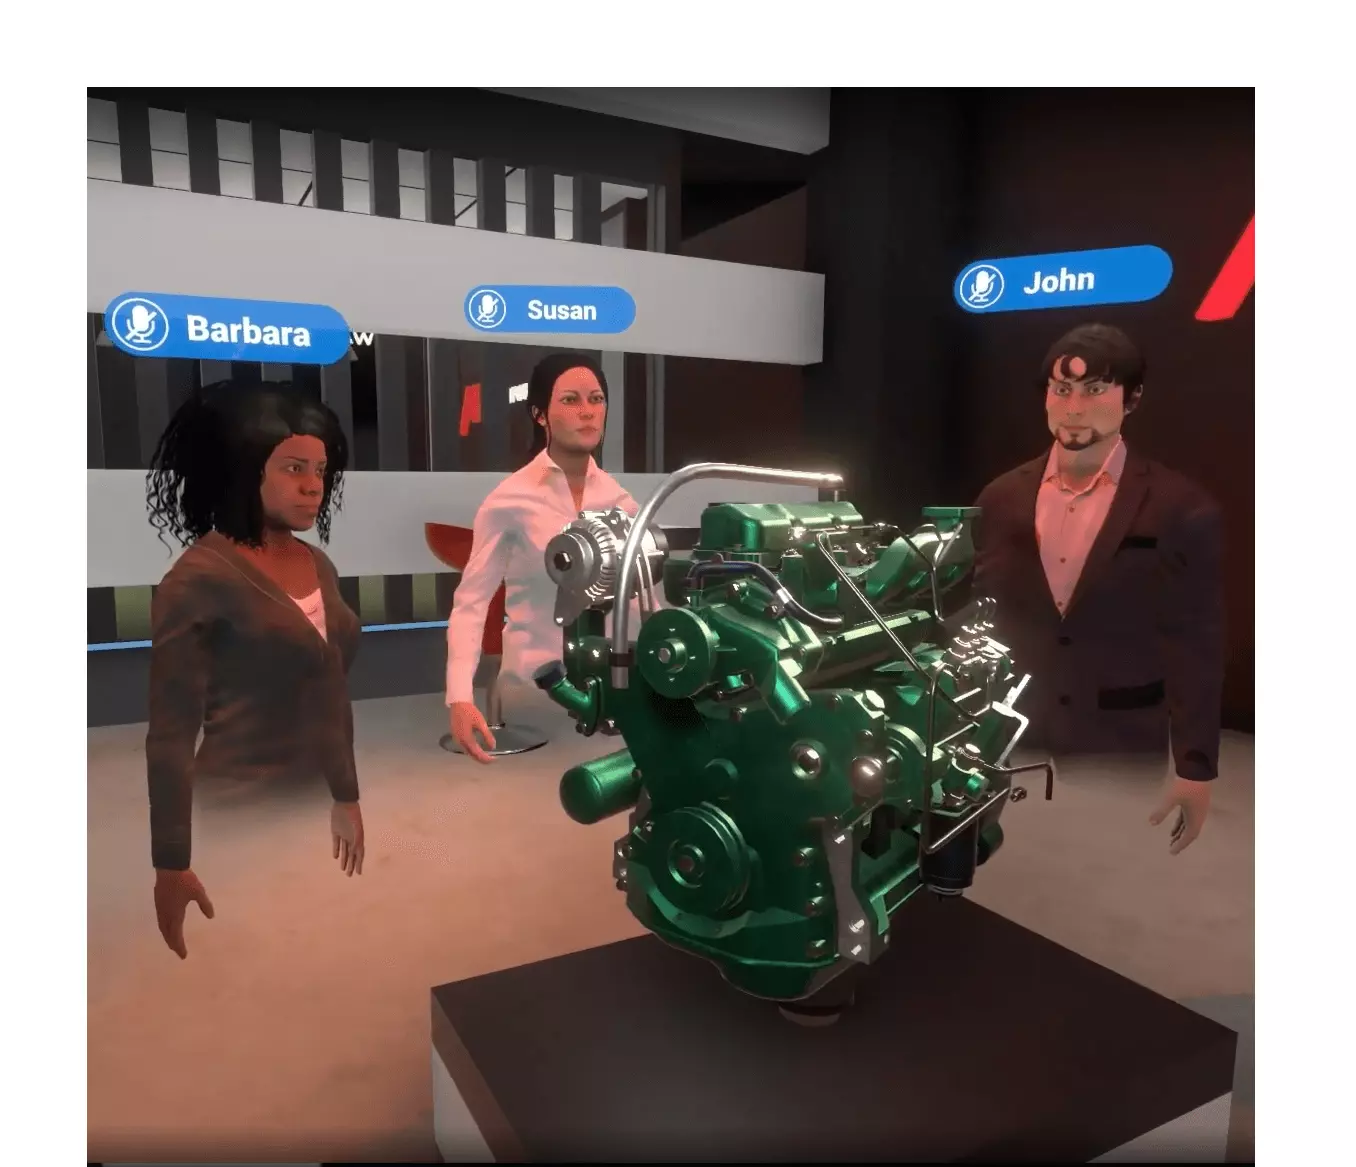 Avatars interacting in a metaverse environment